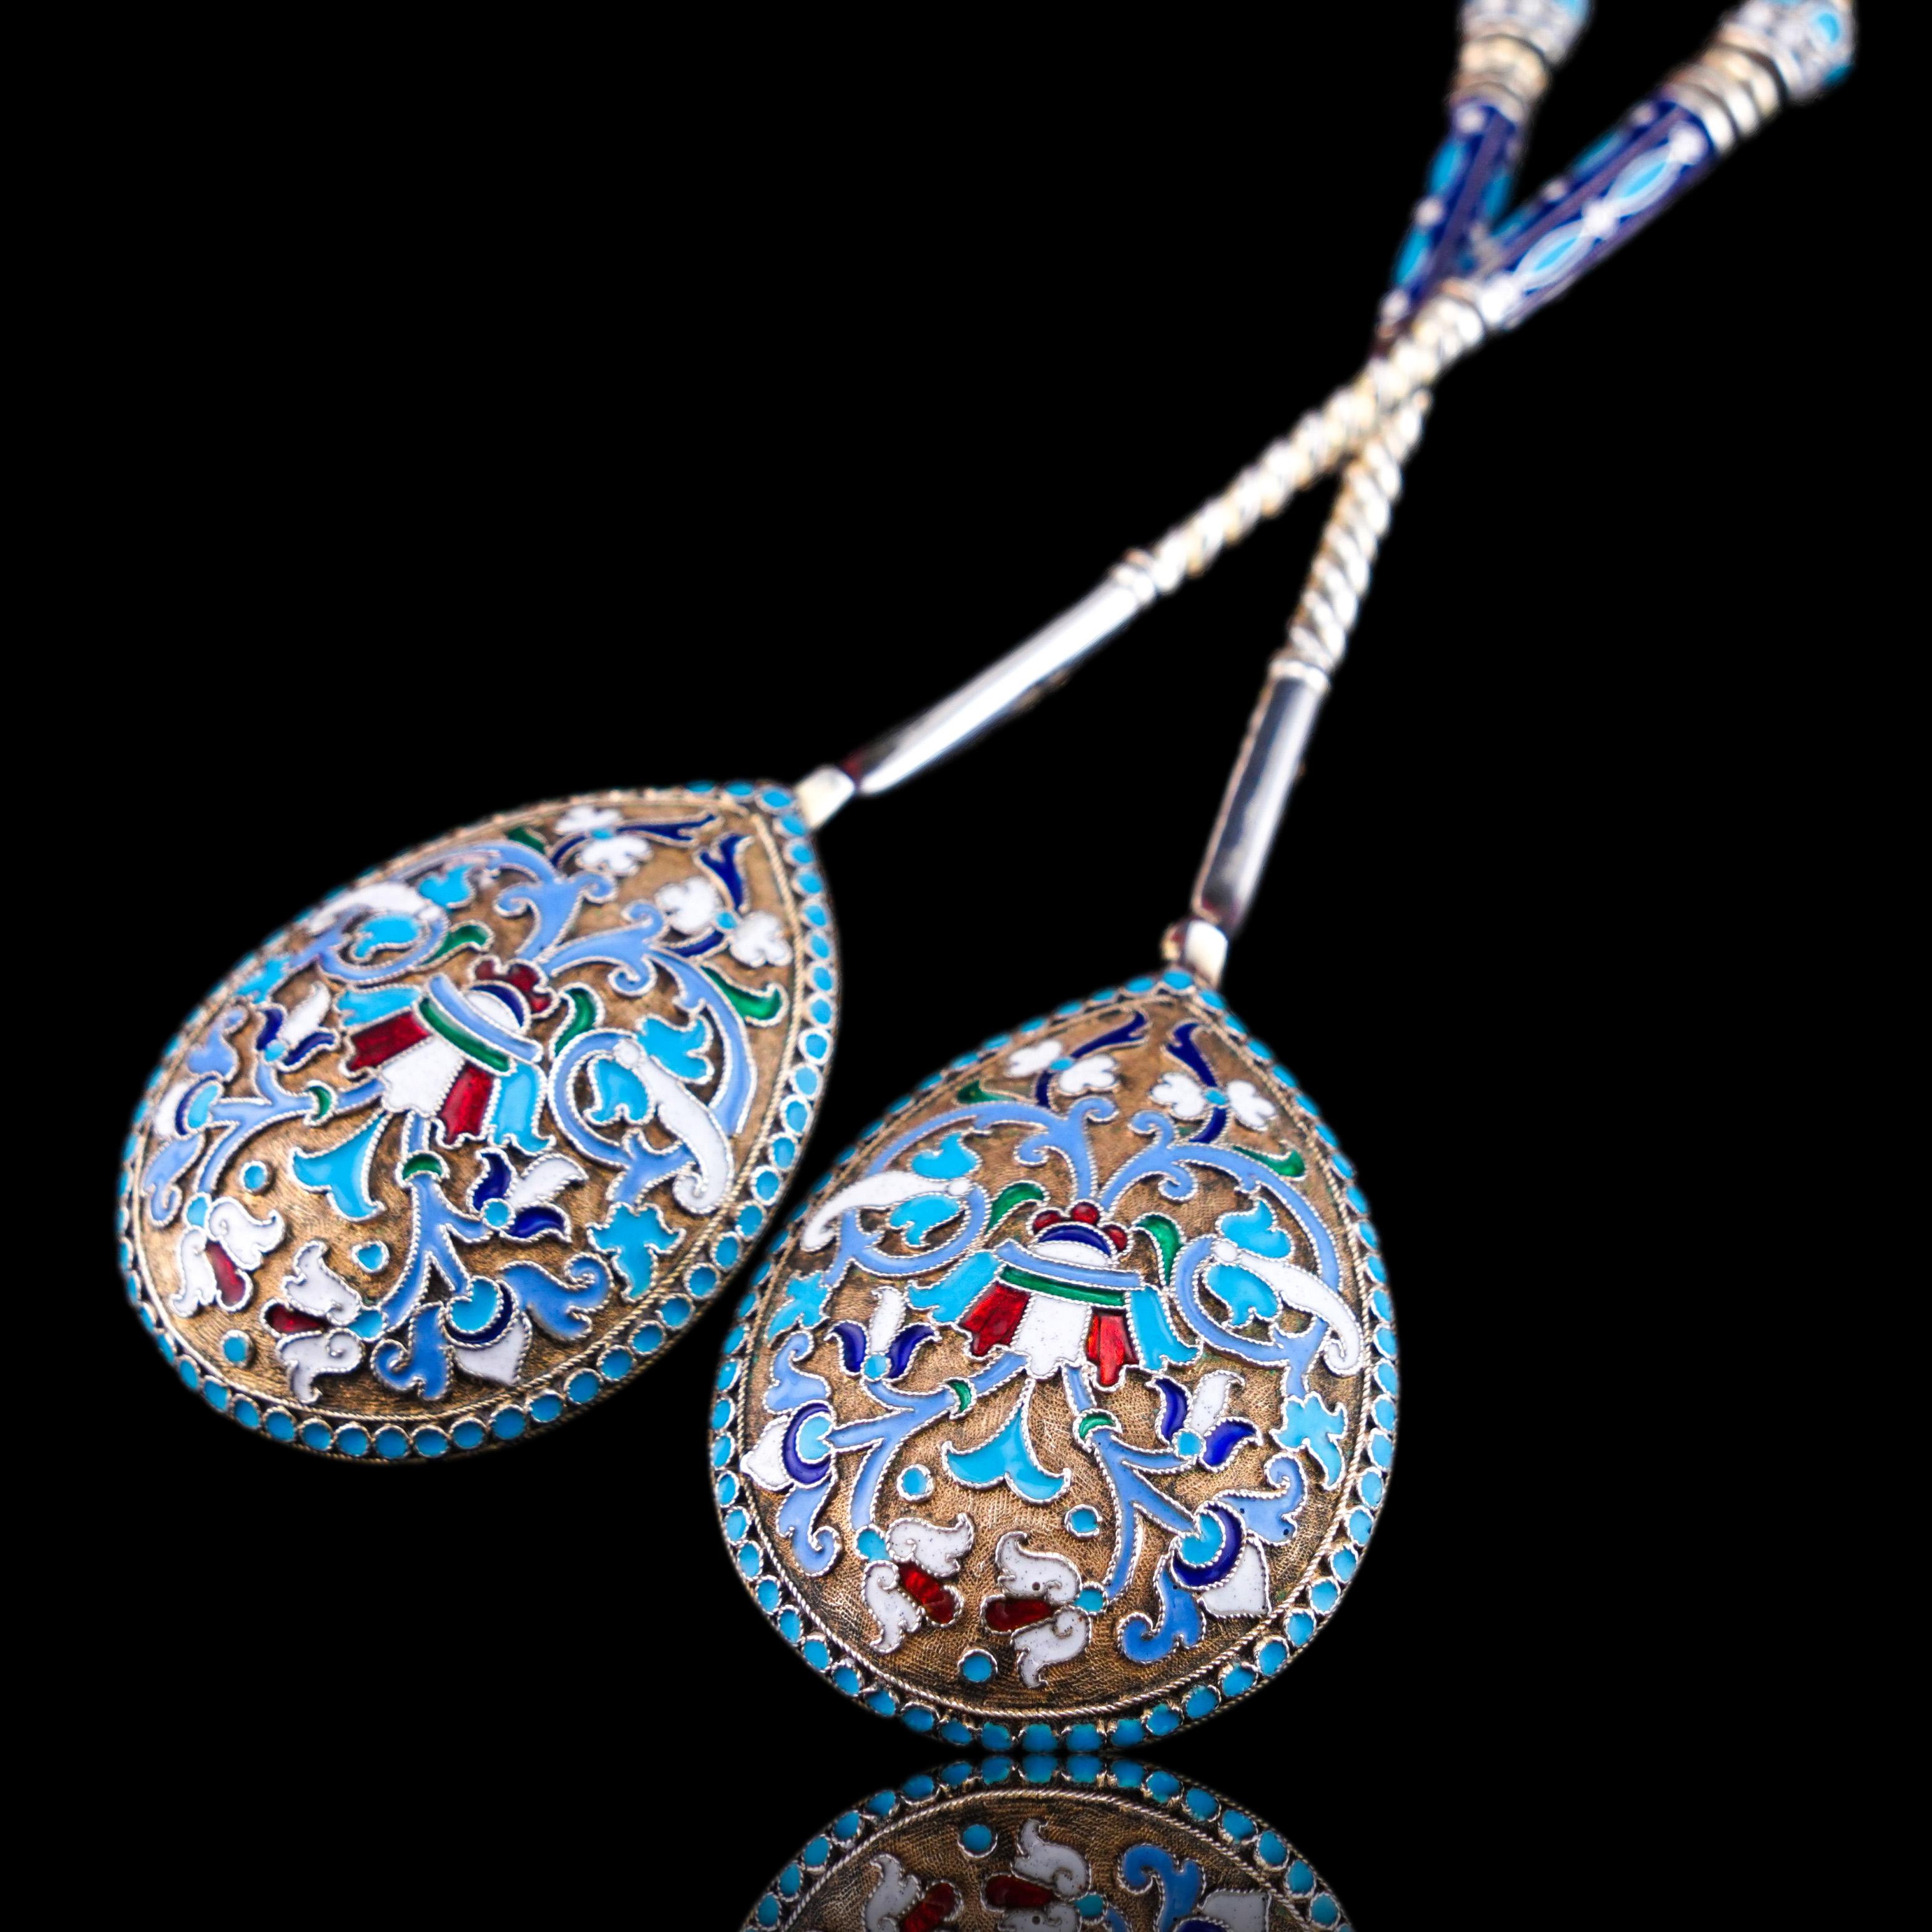 Antique Imperial Russian Solid Silver Spoons with Cloisonne Enamel c.1882 For Sale 3